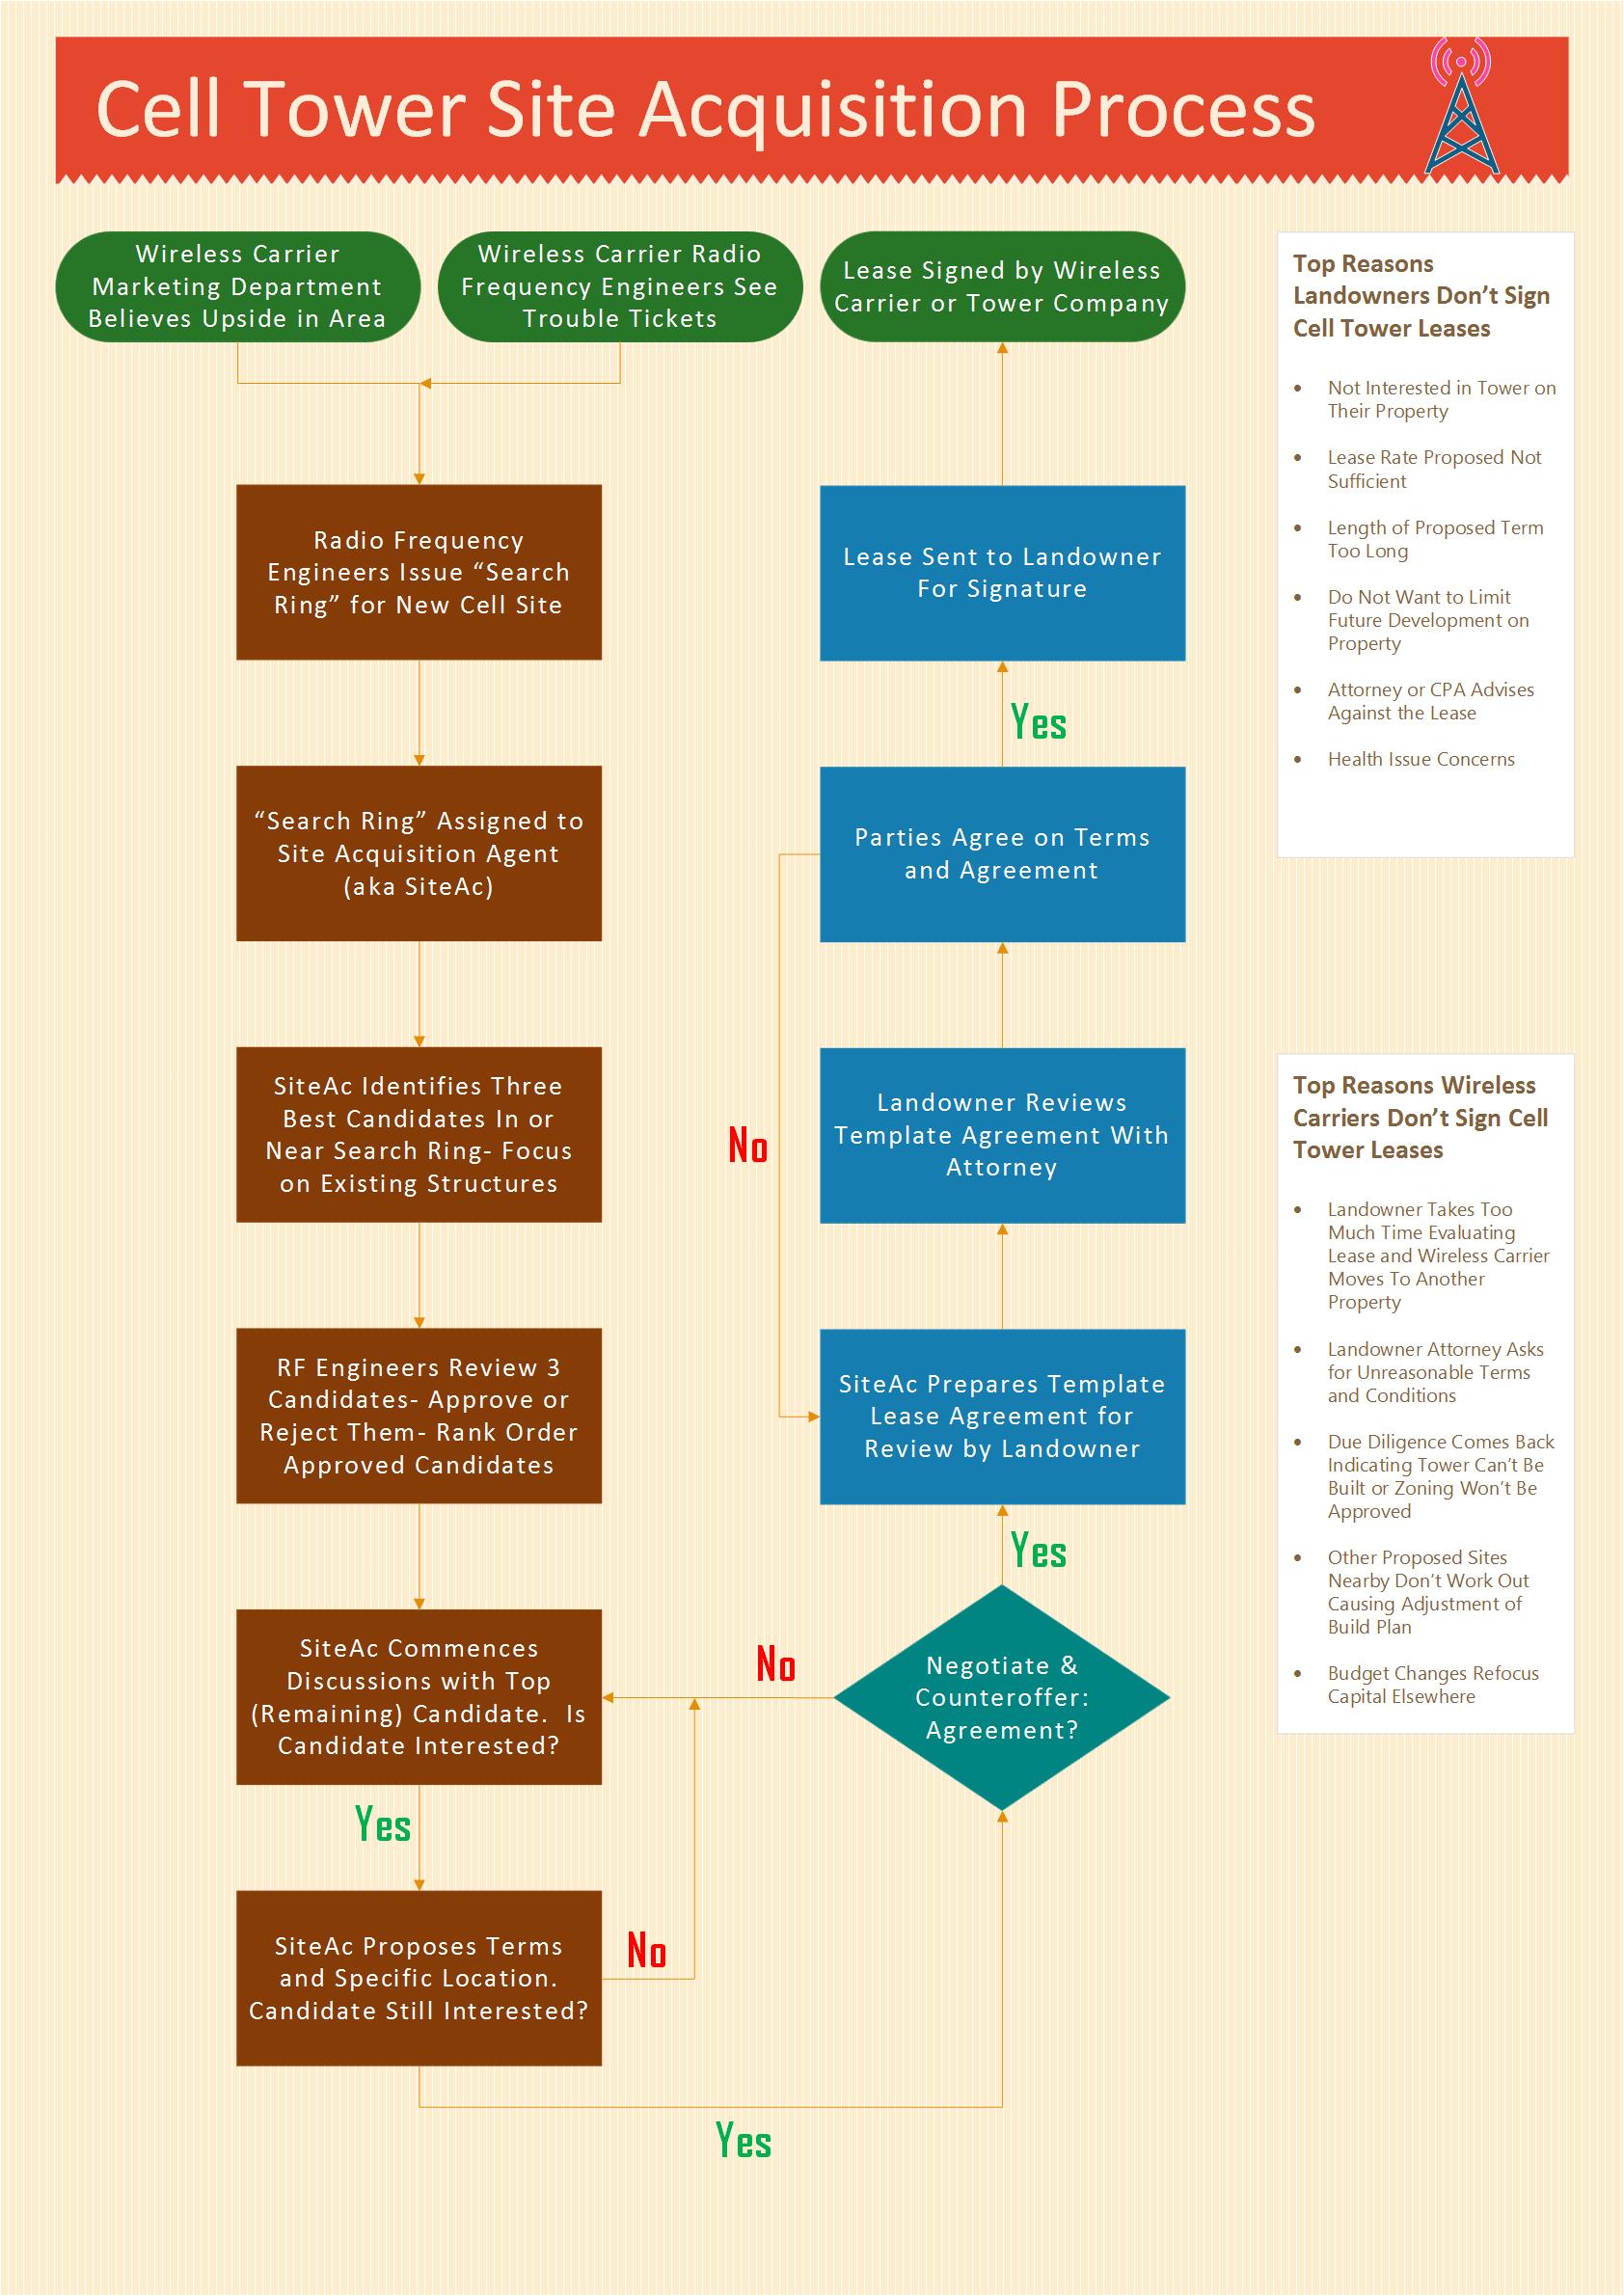 Cell Tower Lease Site Acquisition Process Flow-Chart